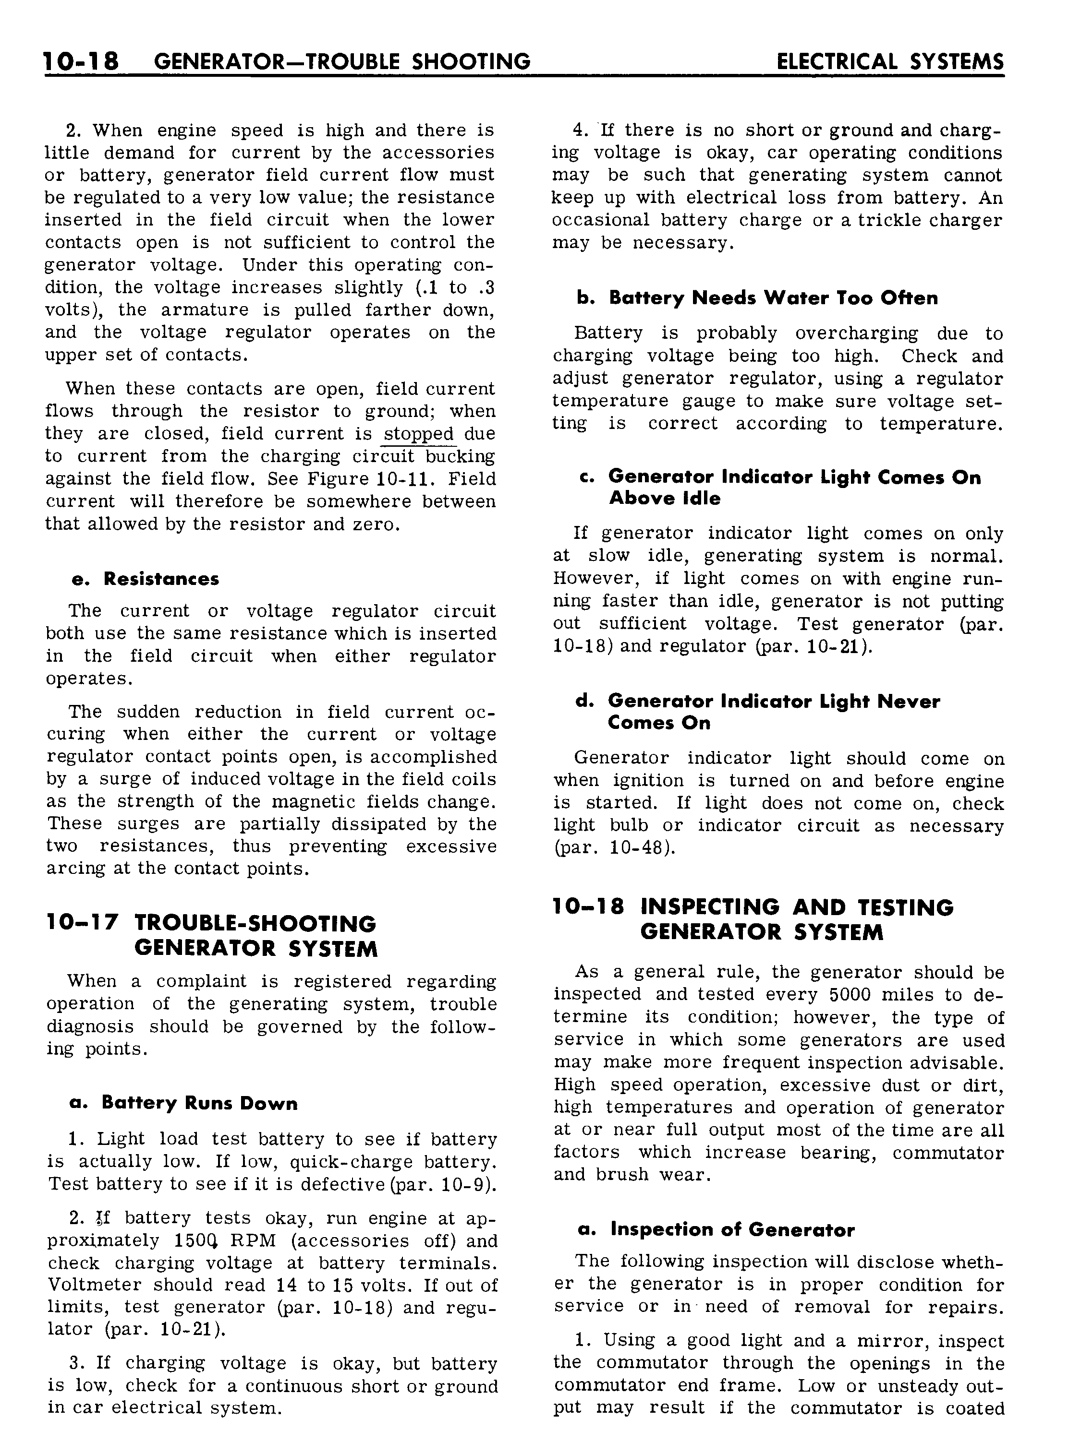 n_10 1961 Buick Shop Manual - Electrical Systems-018-018.jpg